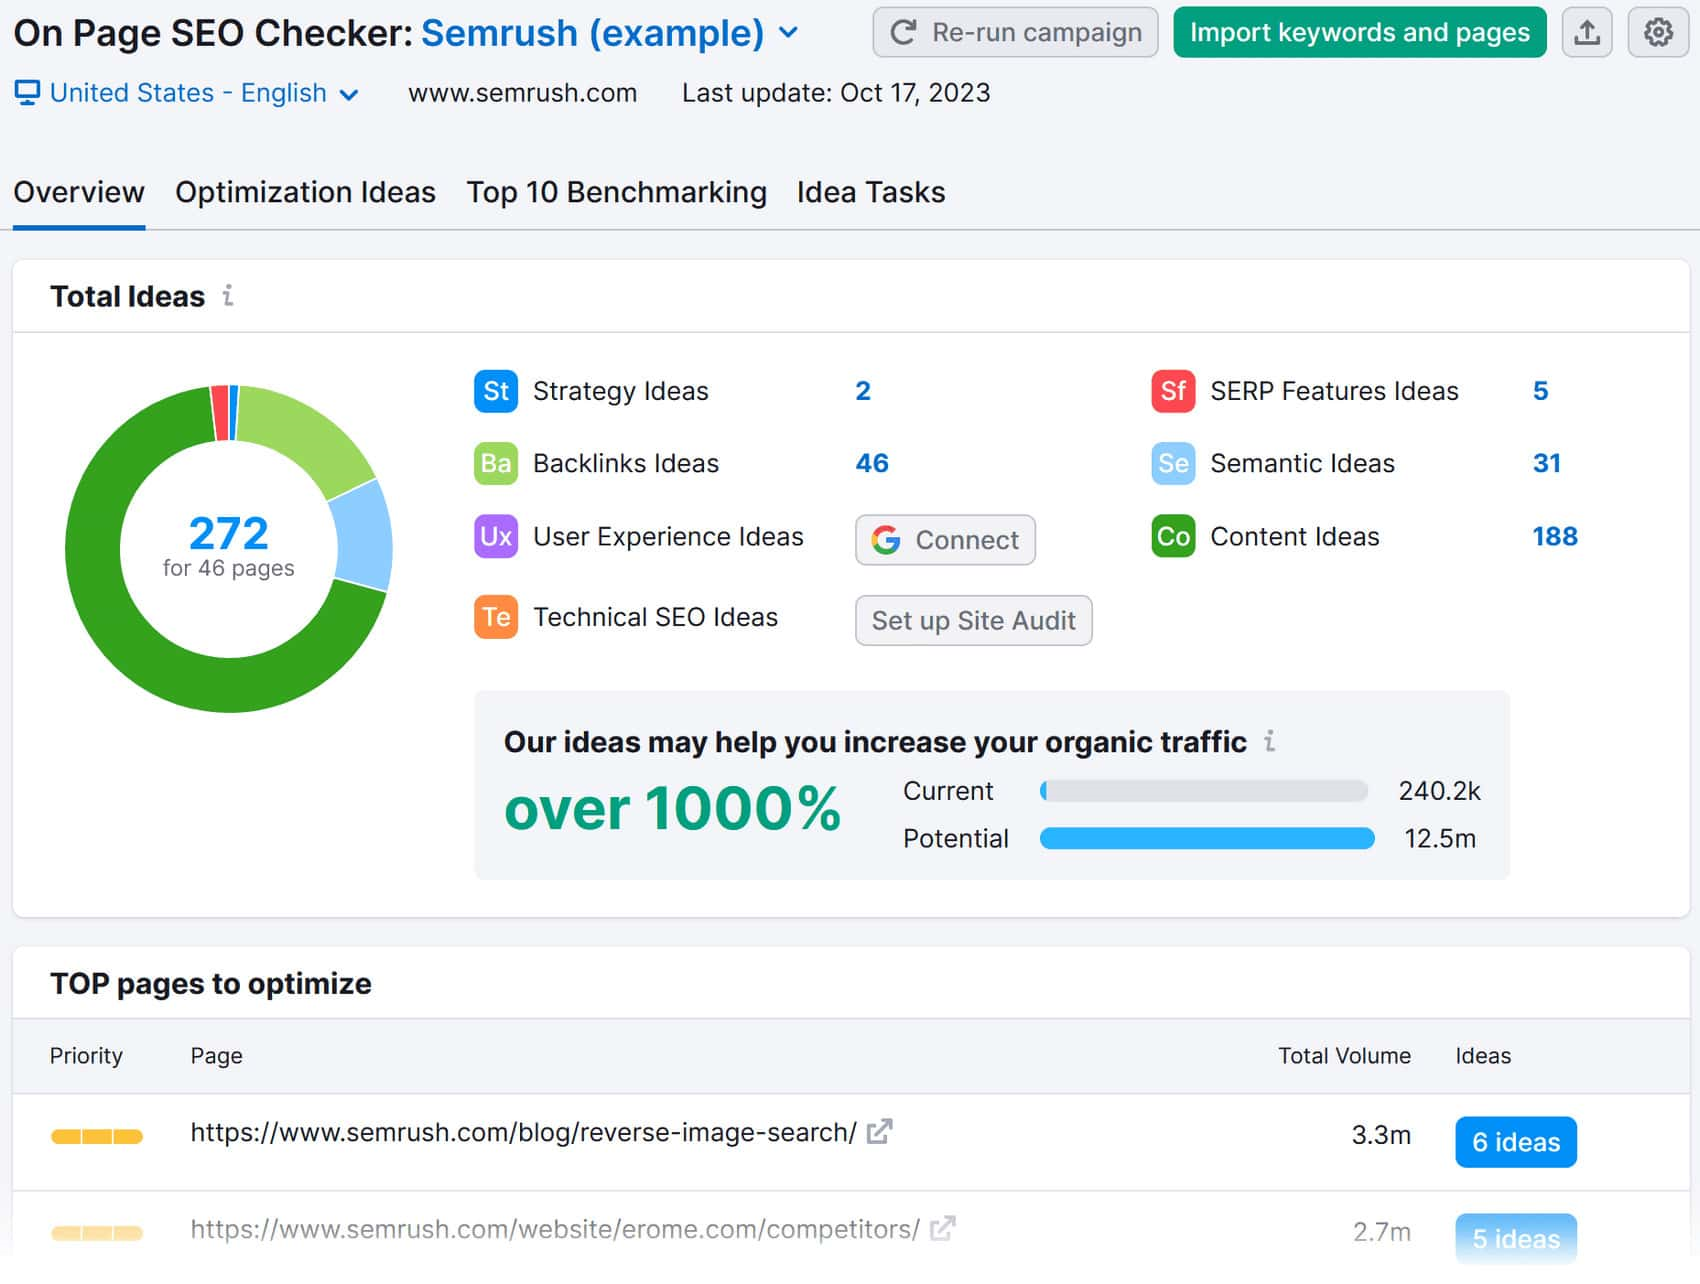 On Page SEO Checker overview dashboard